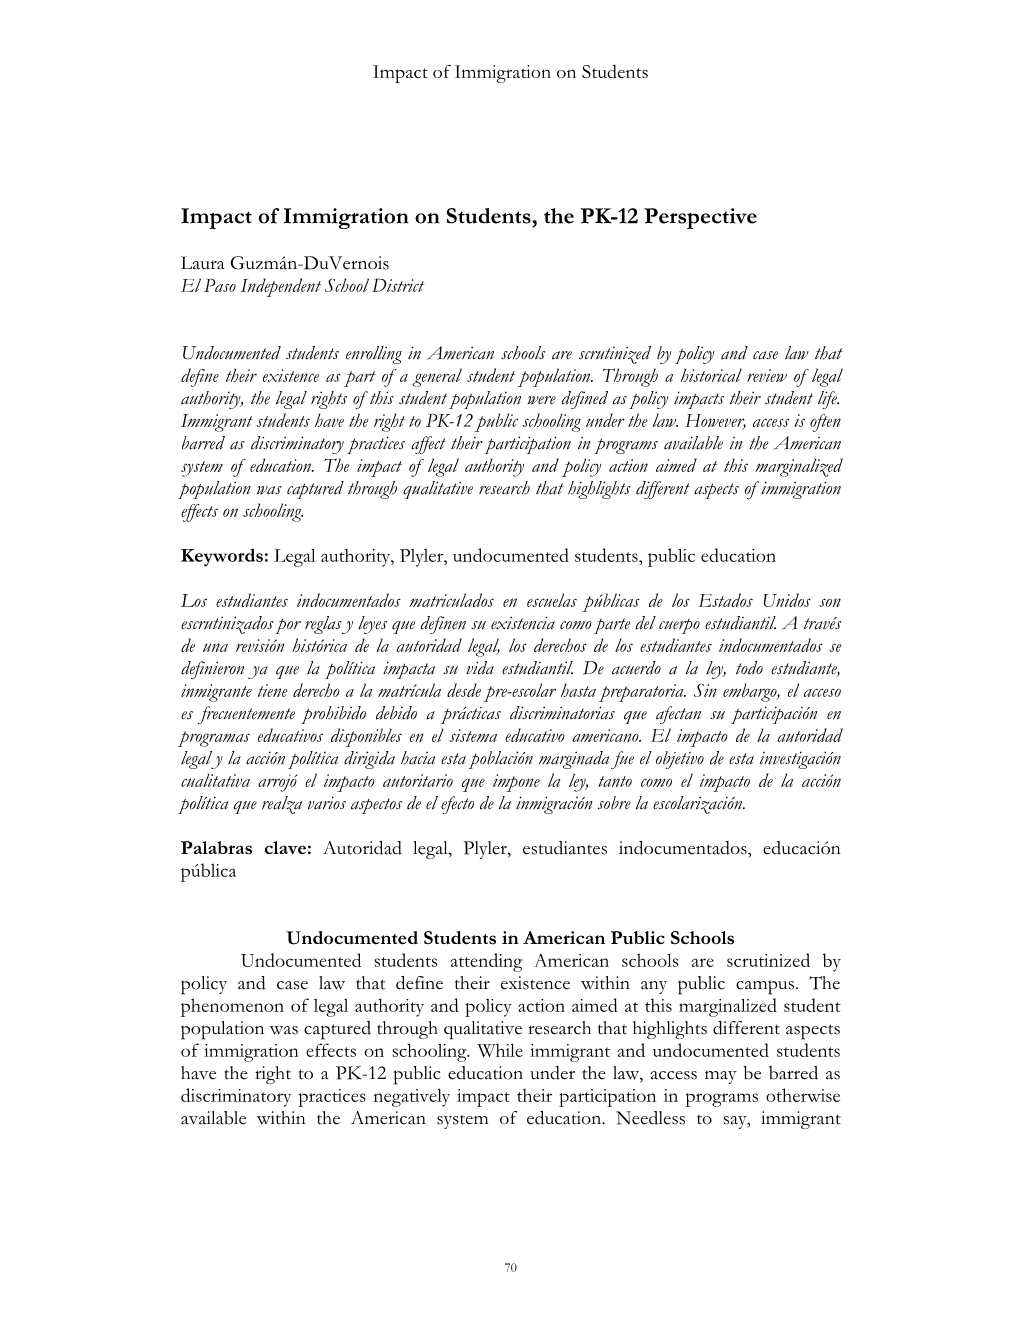 Impact of Immigration on Students, the PK-12 Perspective